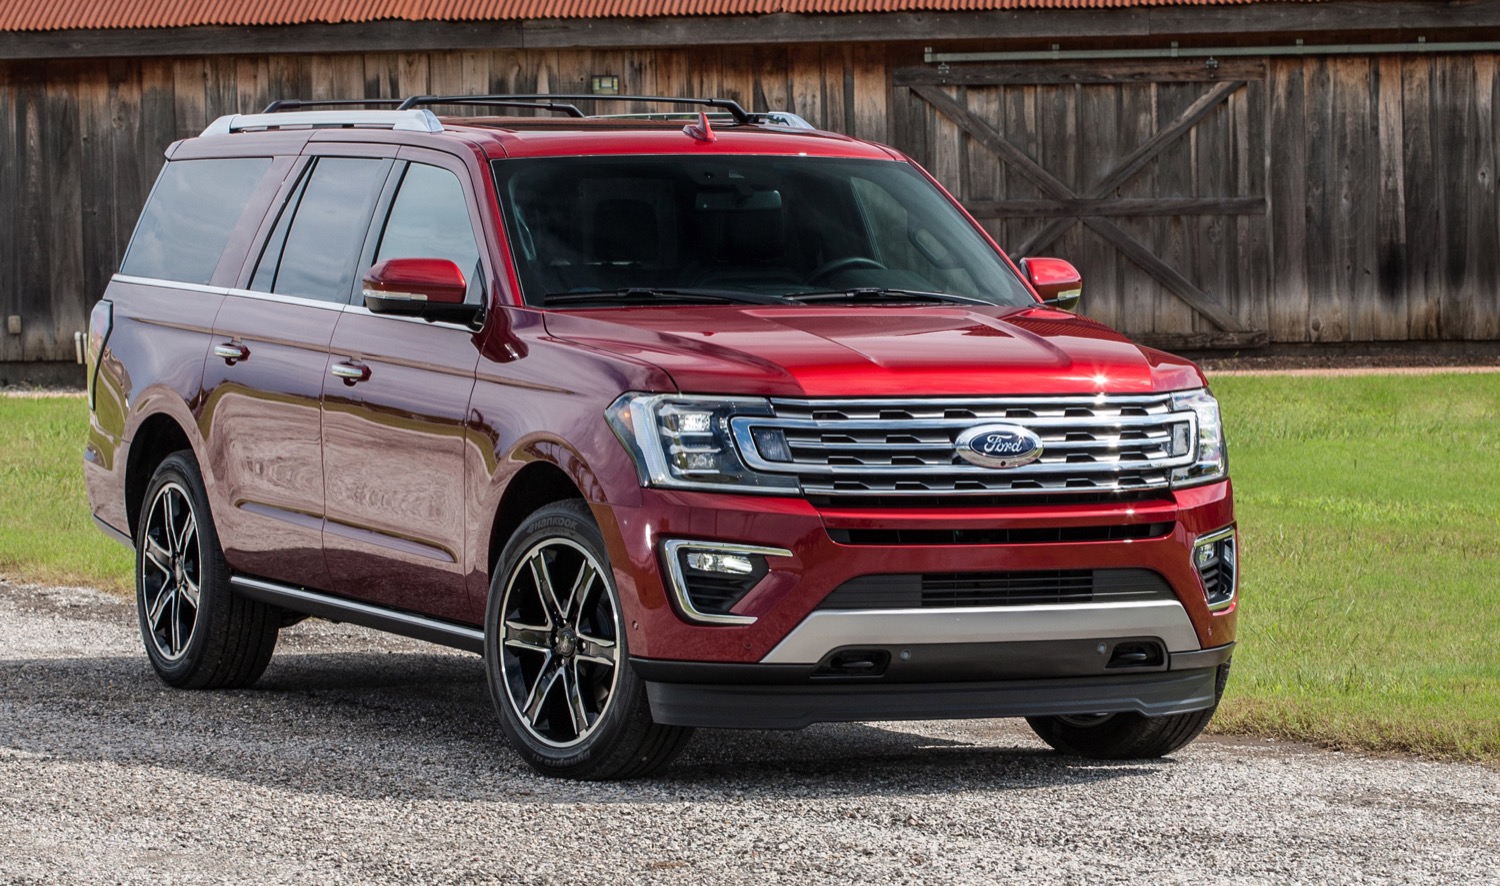 2020 Ford Expedition Gets New Burgundy Velvet Color: First Look